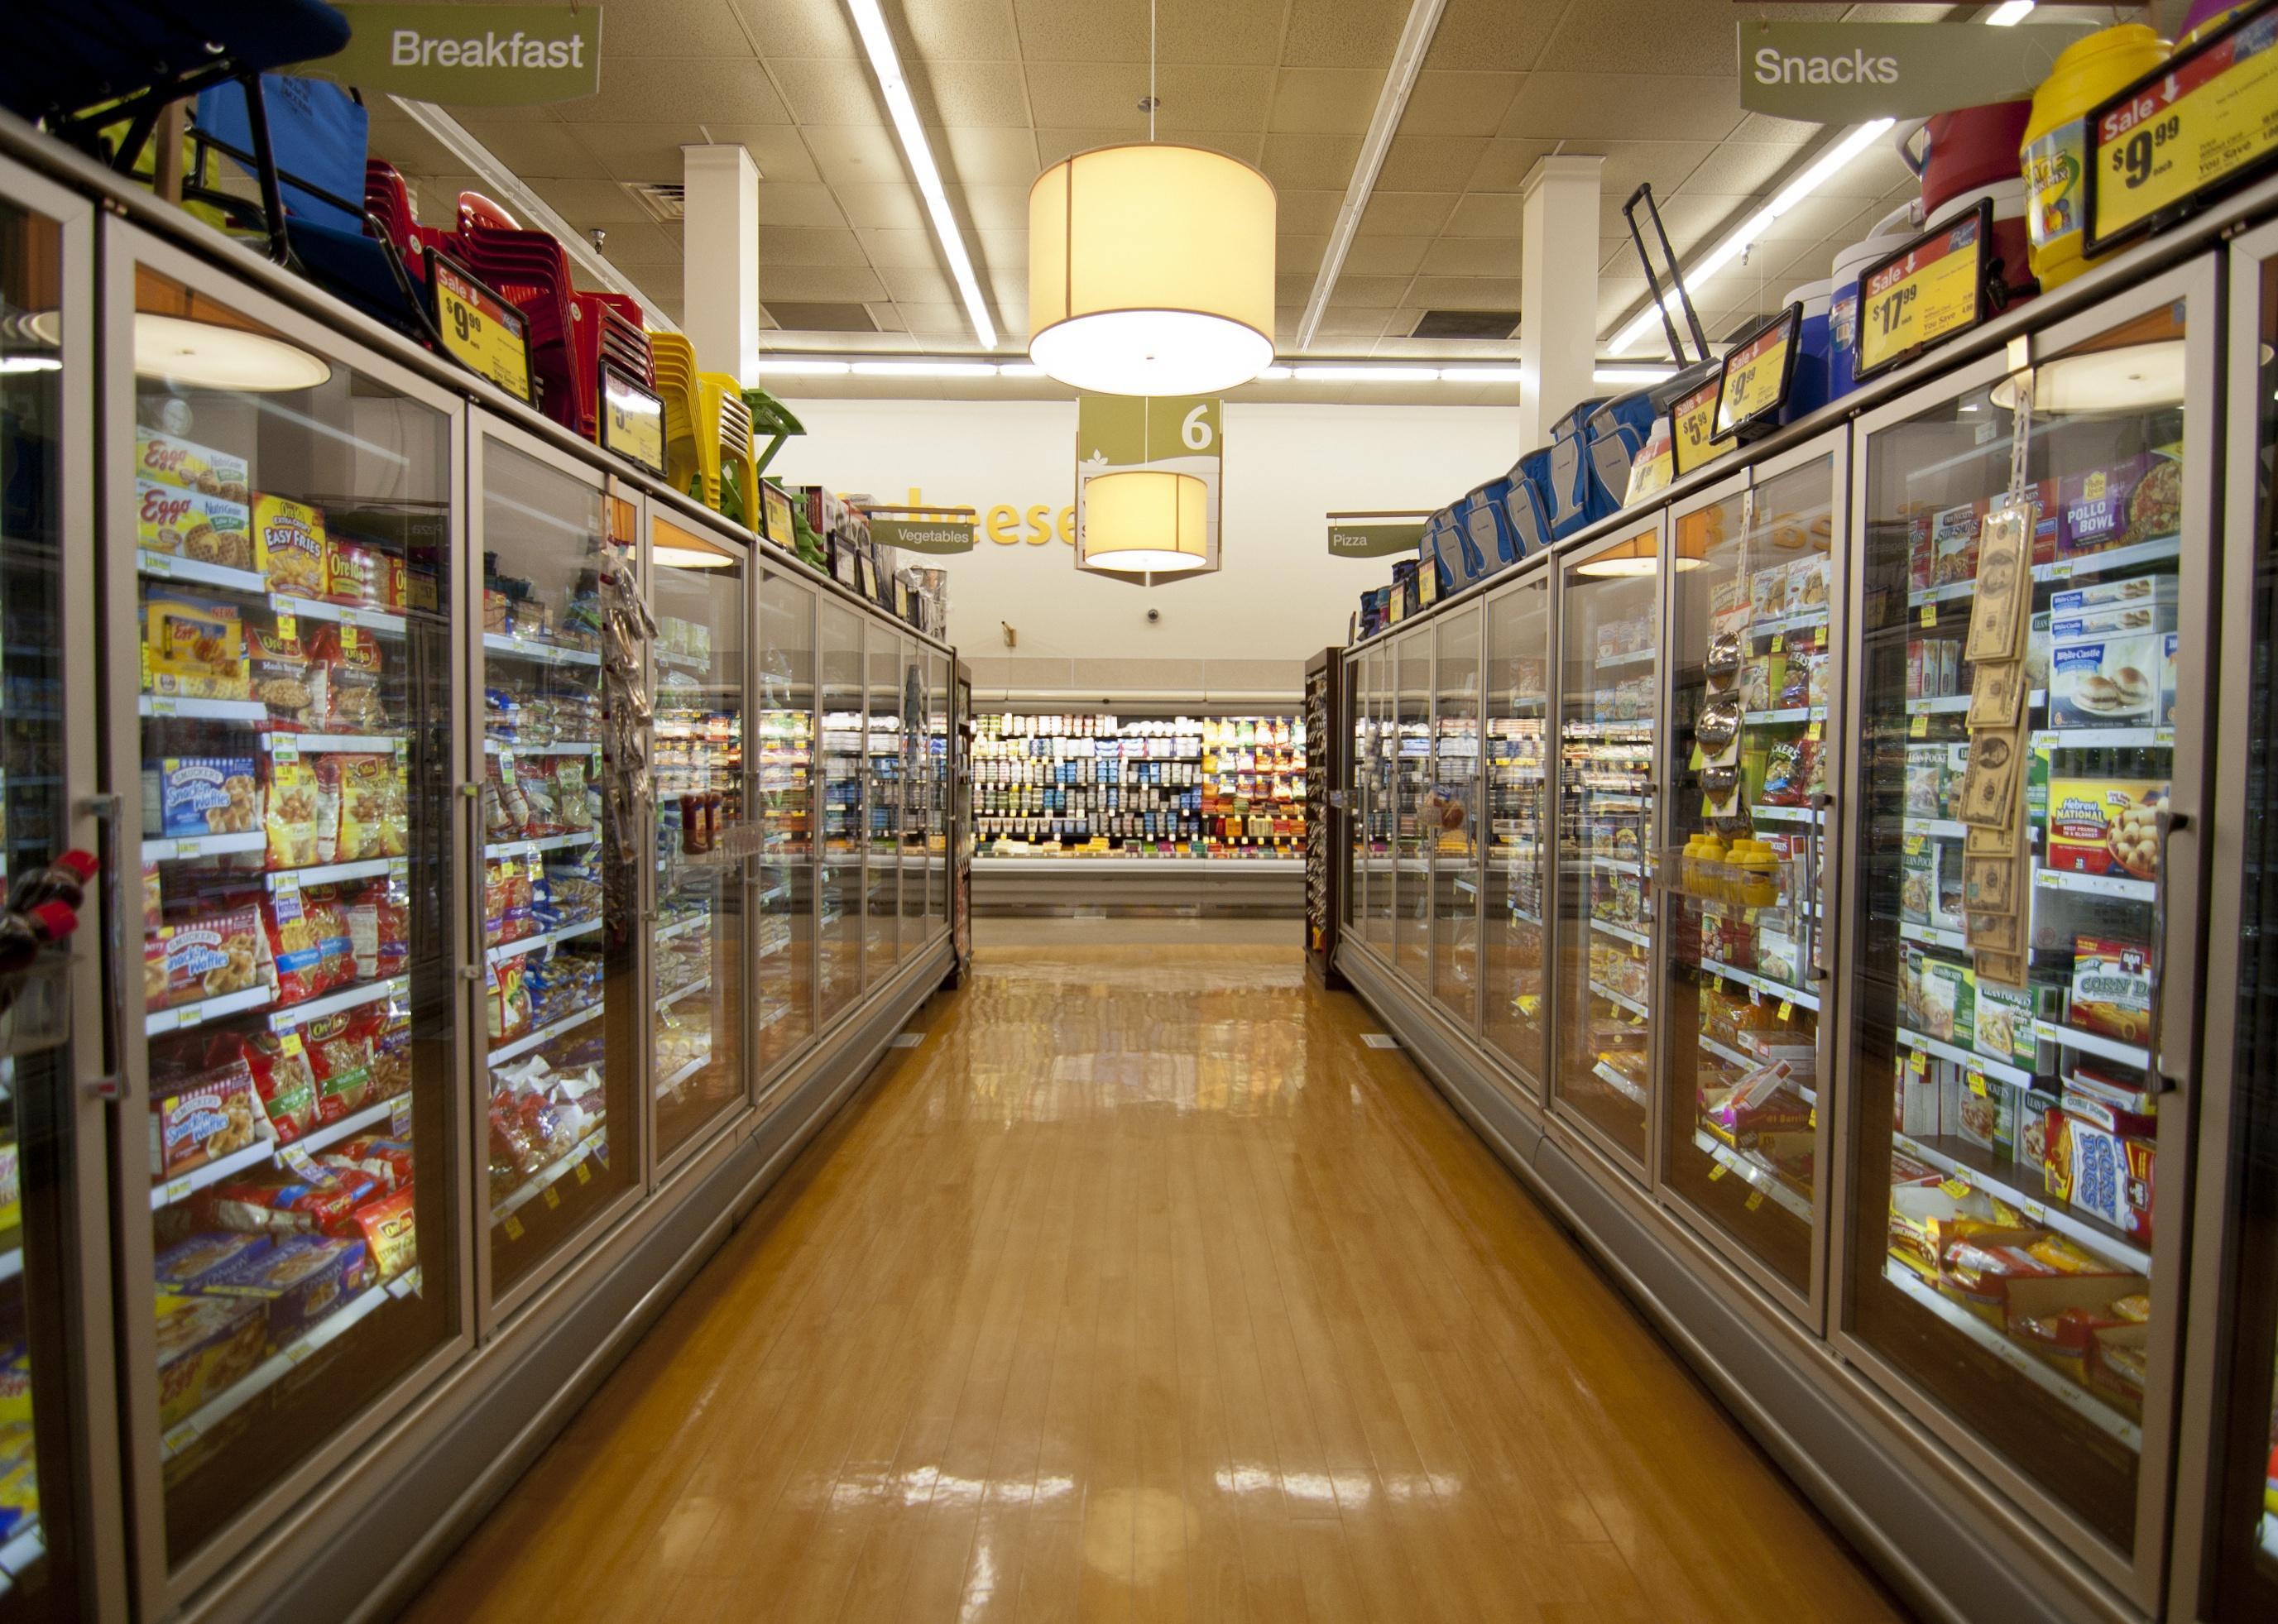 Refrigerated foods aisle.